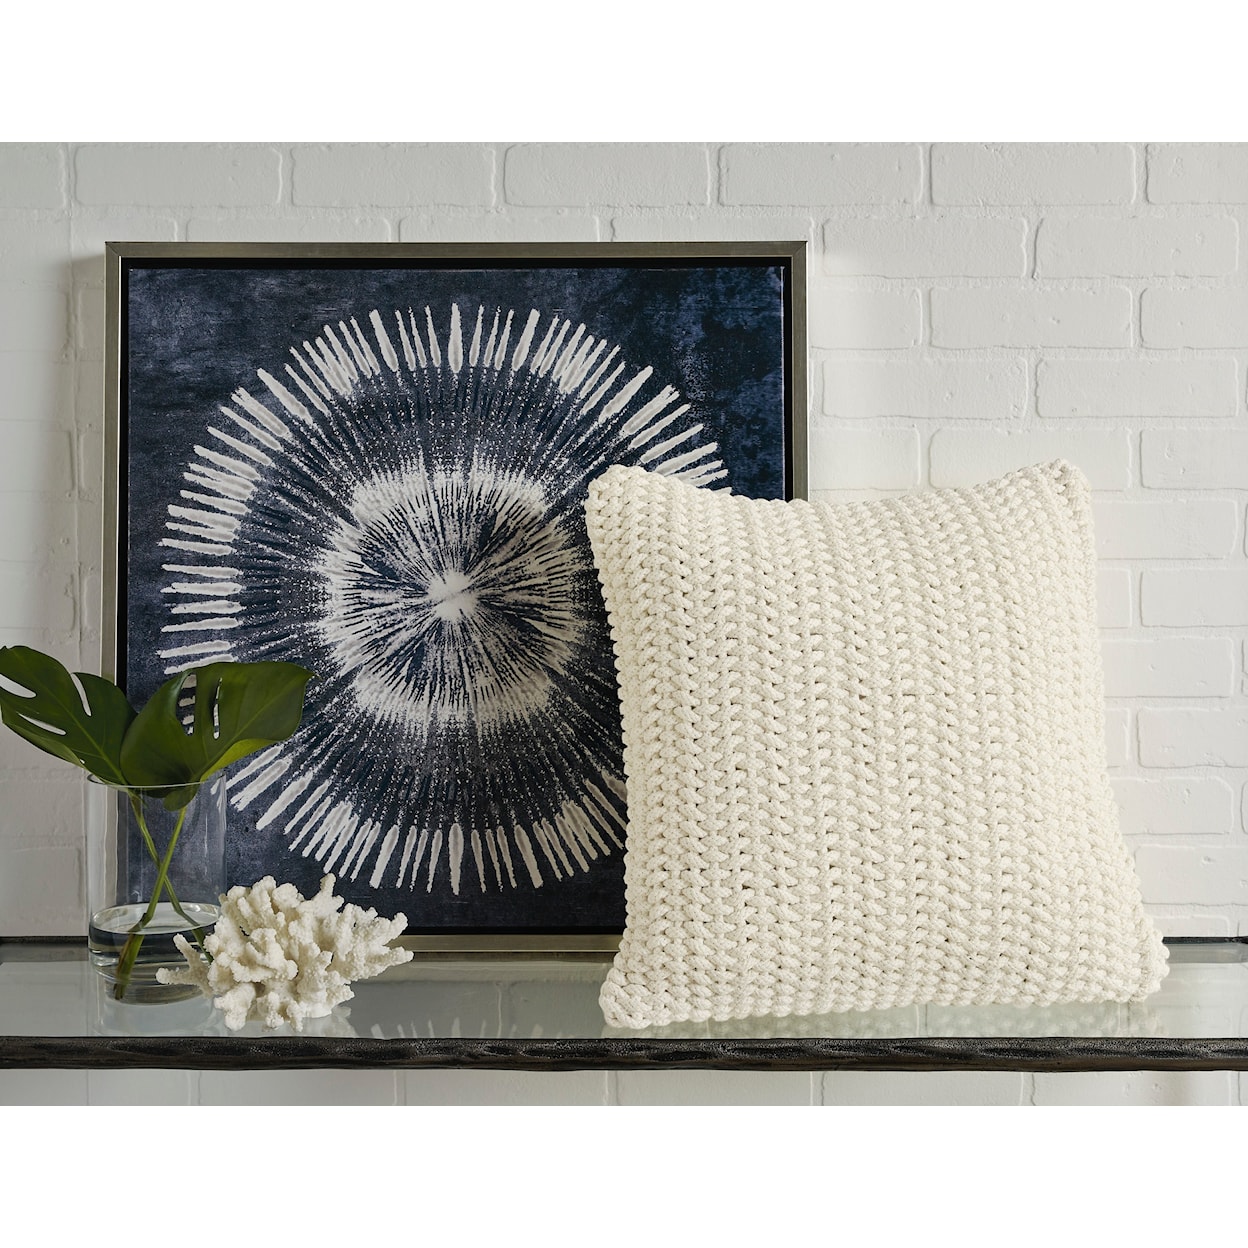 Signature Design by Ashley Renemore Renemore Ivory Pillow